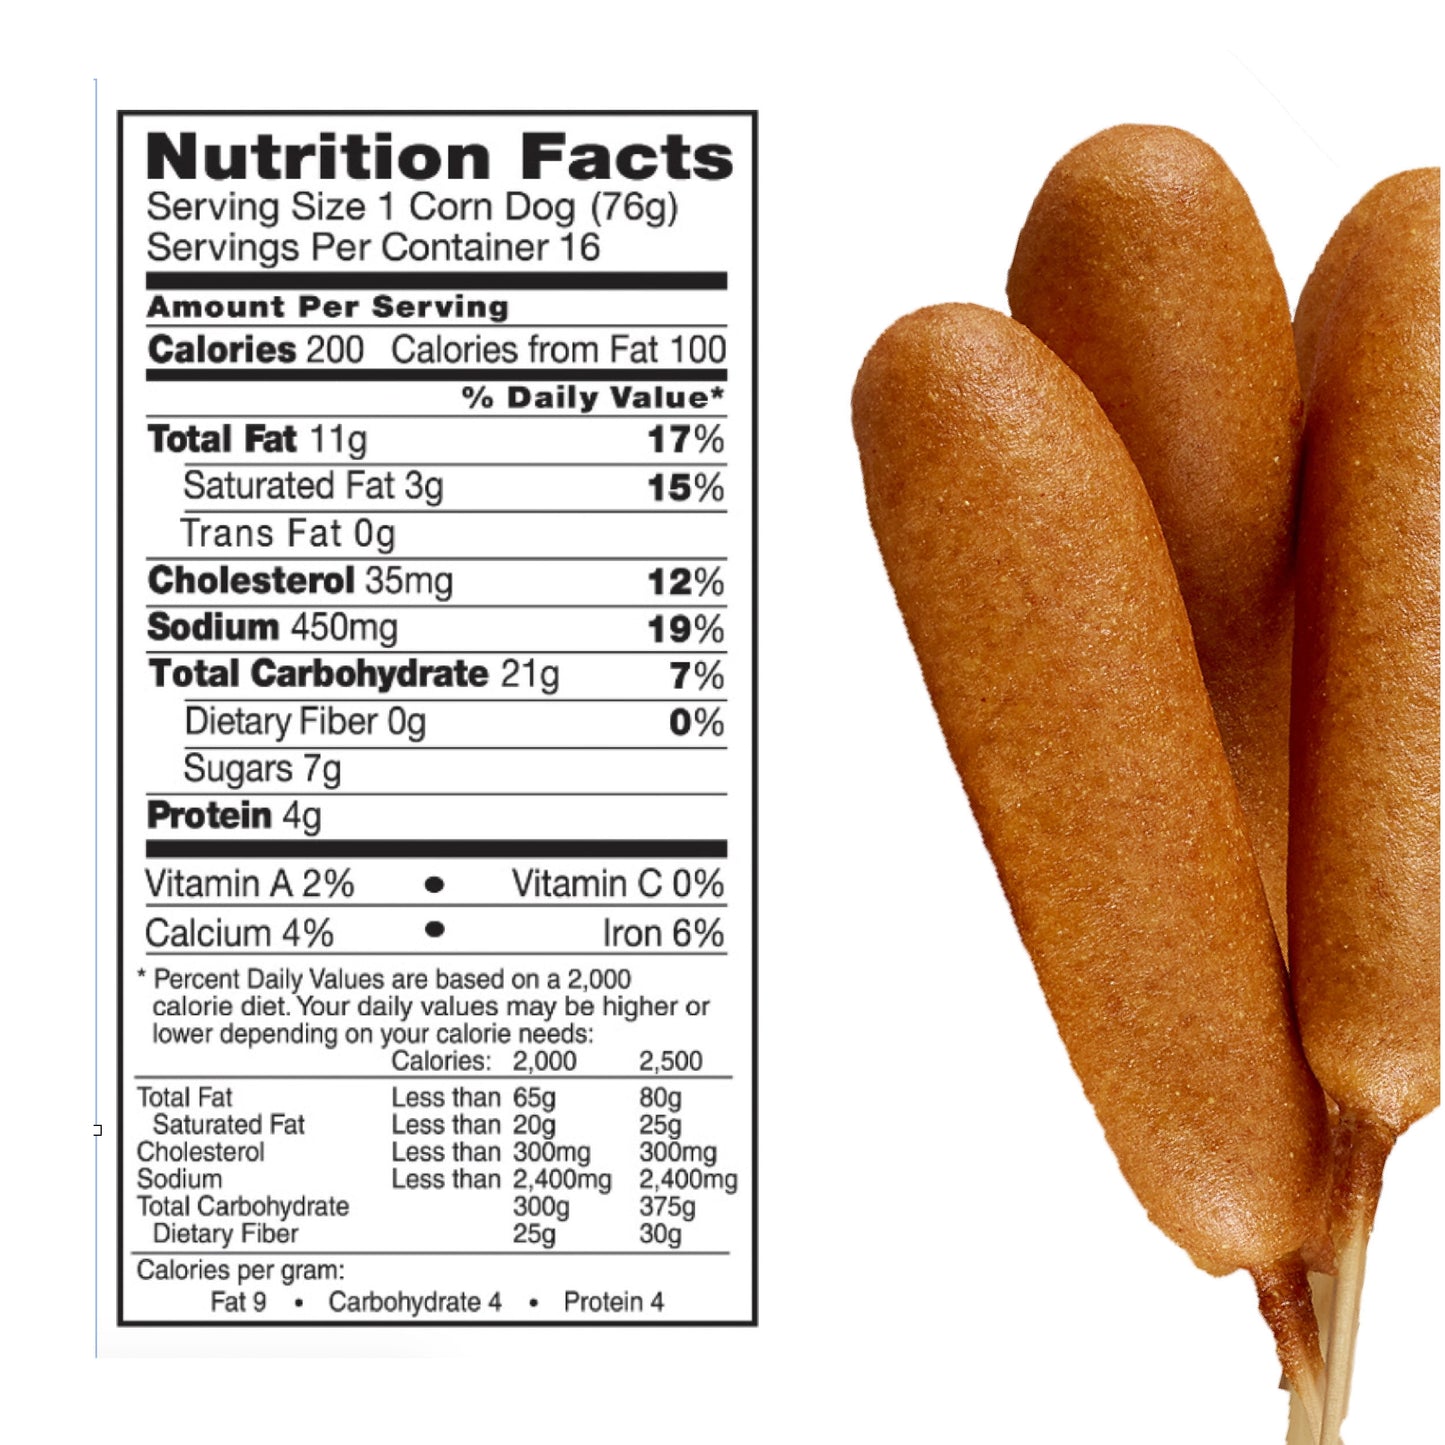 Bar-S Classic Honey Dipped Chicken and Pork Corn Dogs, 43 oz, 16 Count (Frozen)